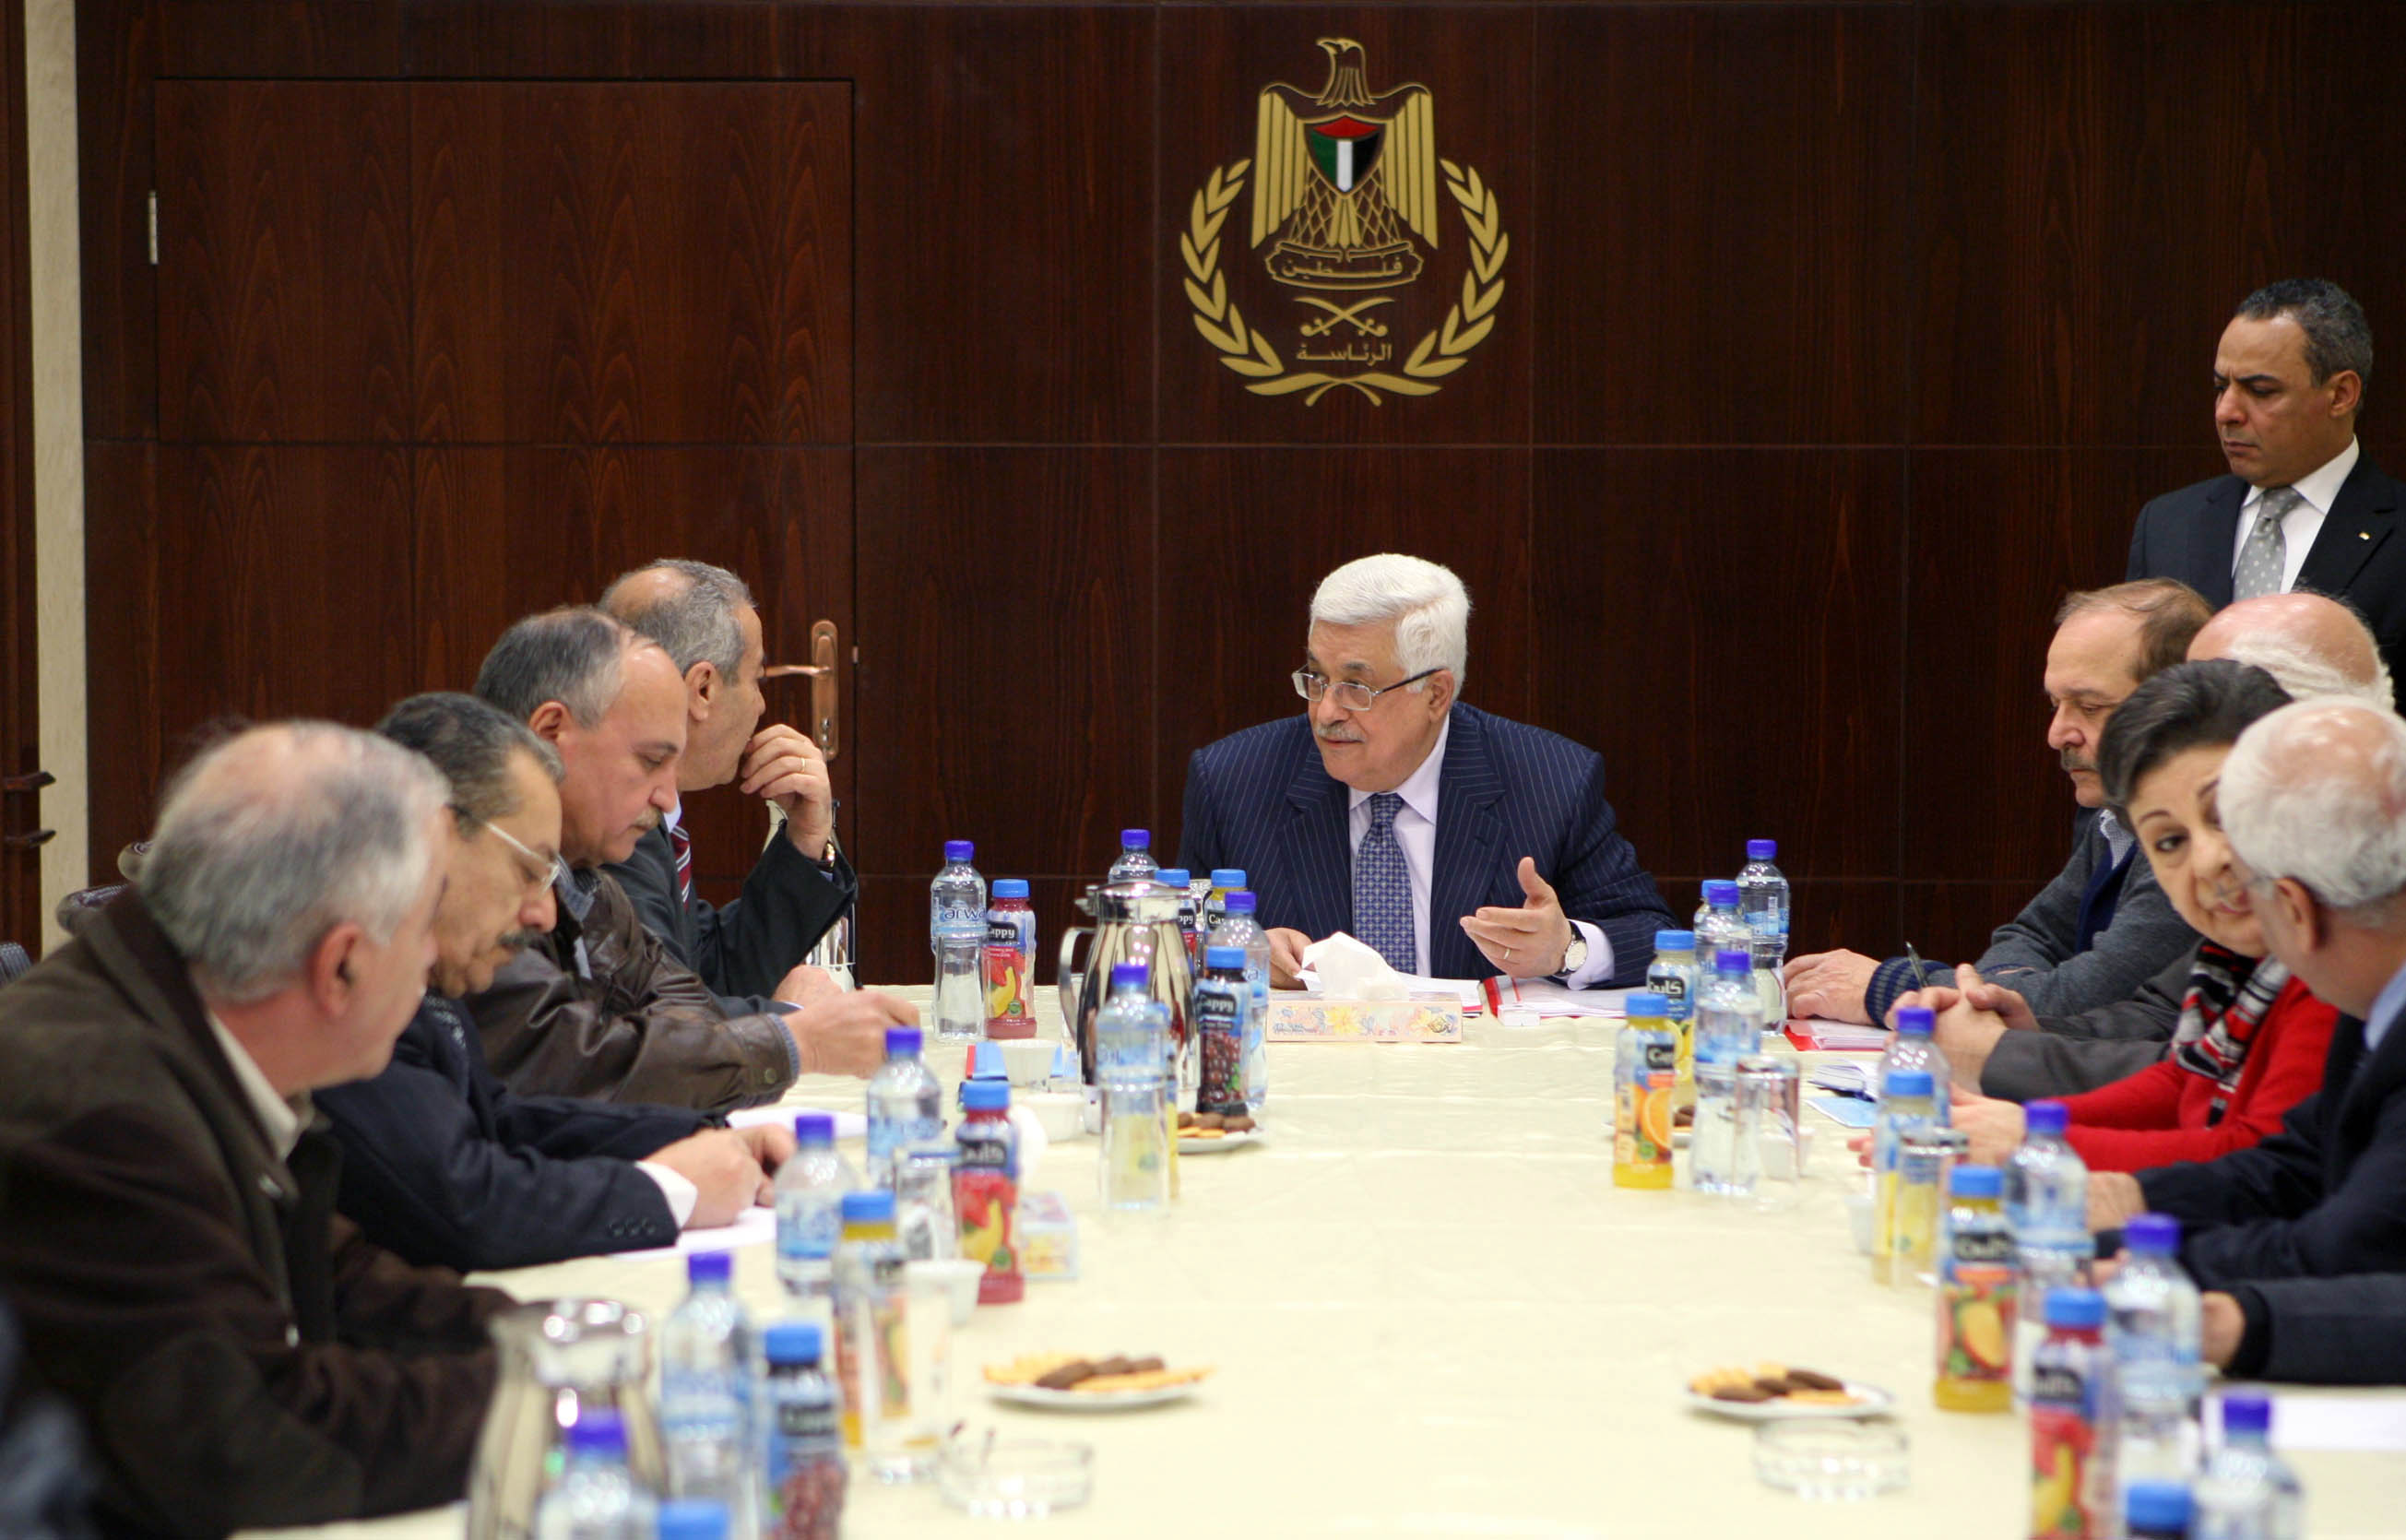 Mr. President Mahmoud Abbas (Abu Mazen) during the meeting of the Executive Committee of the PLO today in Ramallah, 13.12.2010
Photo by: Thaer Ganaim